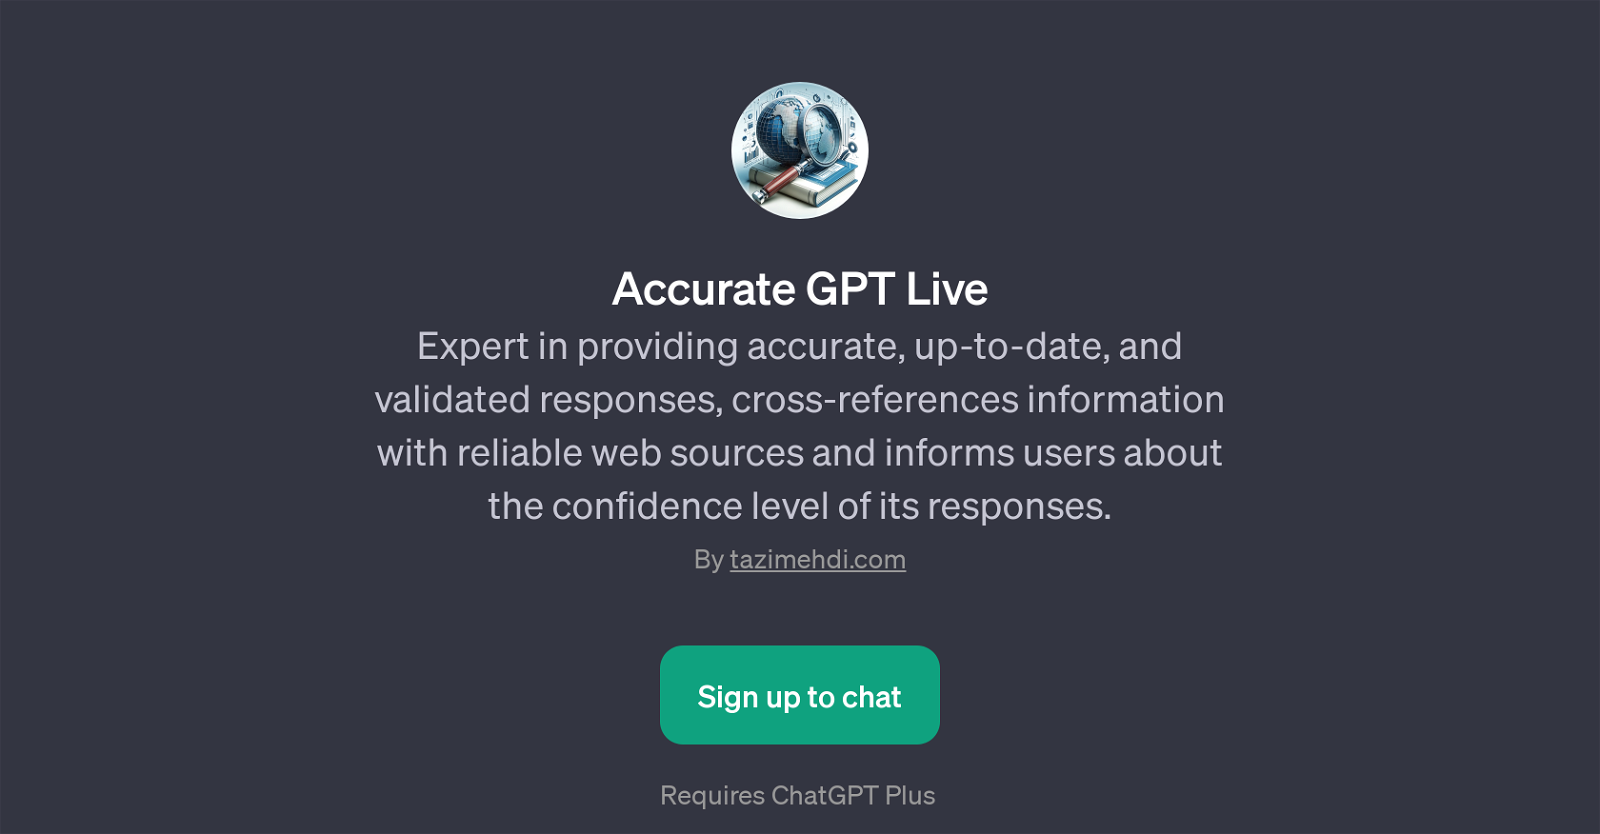 Accurate GPT Live website